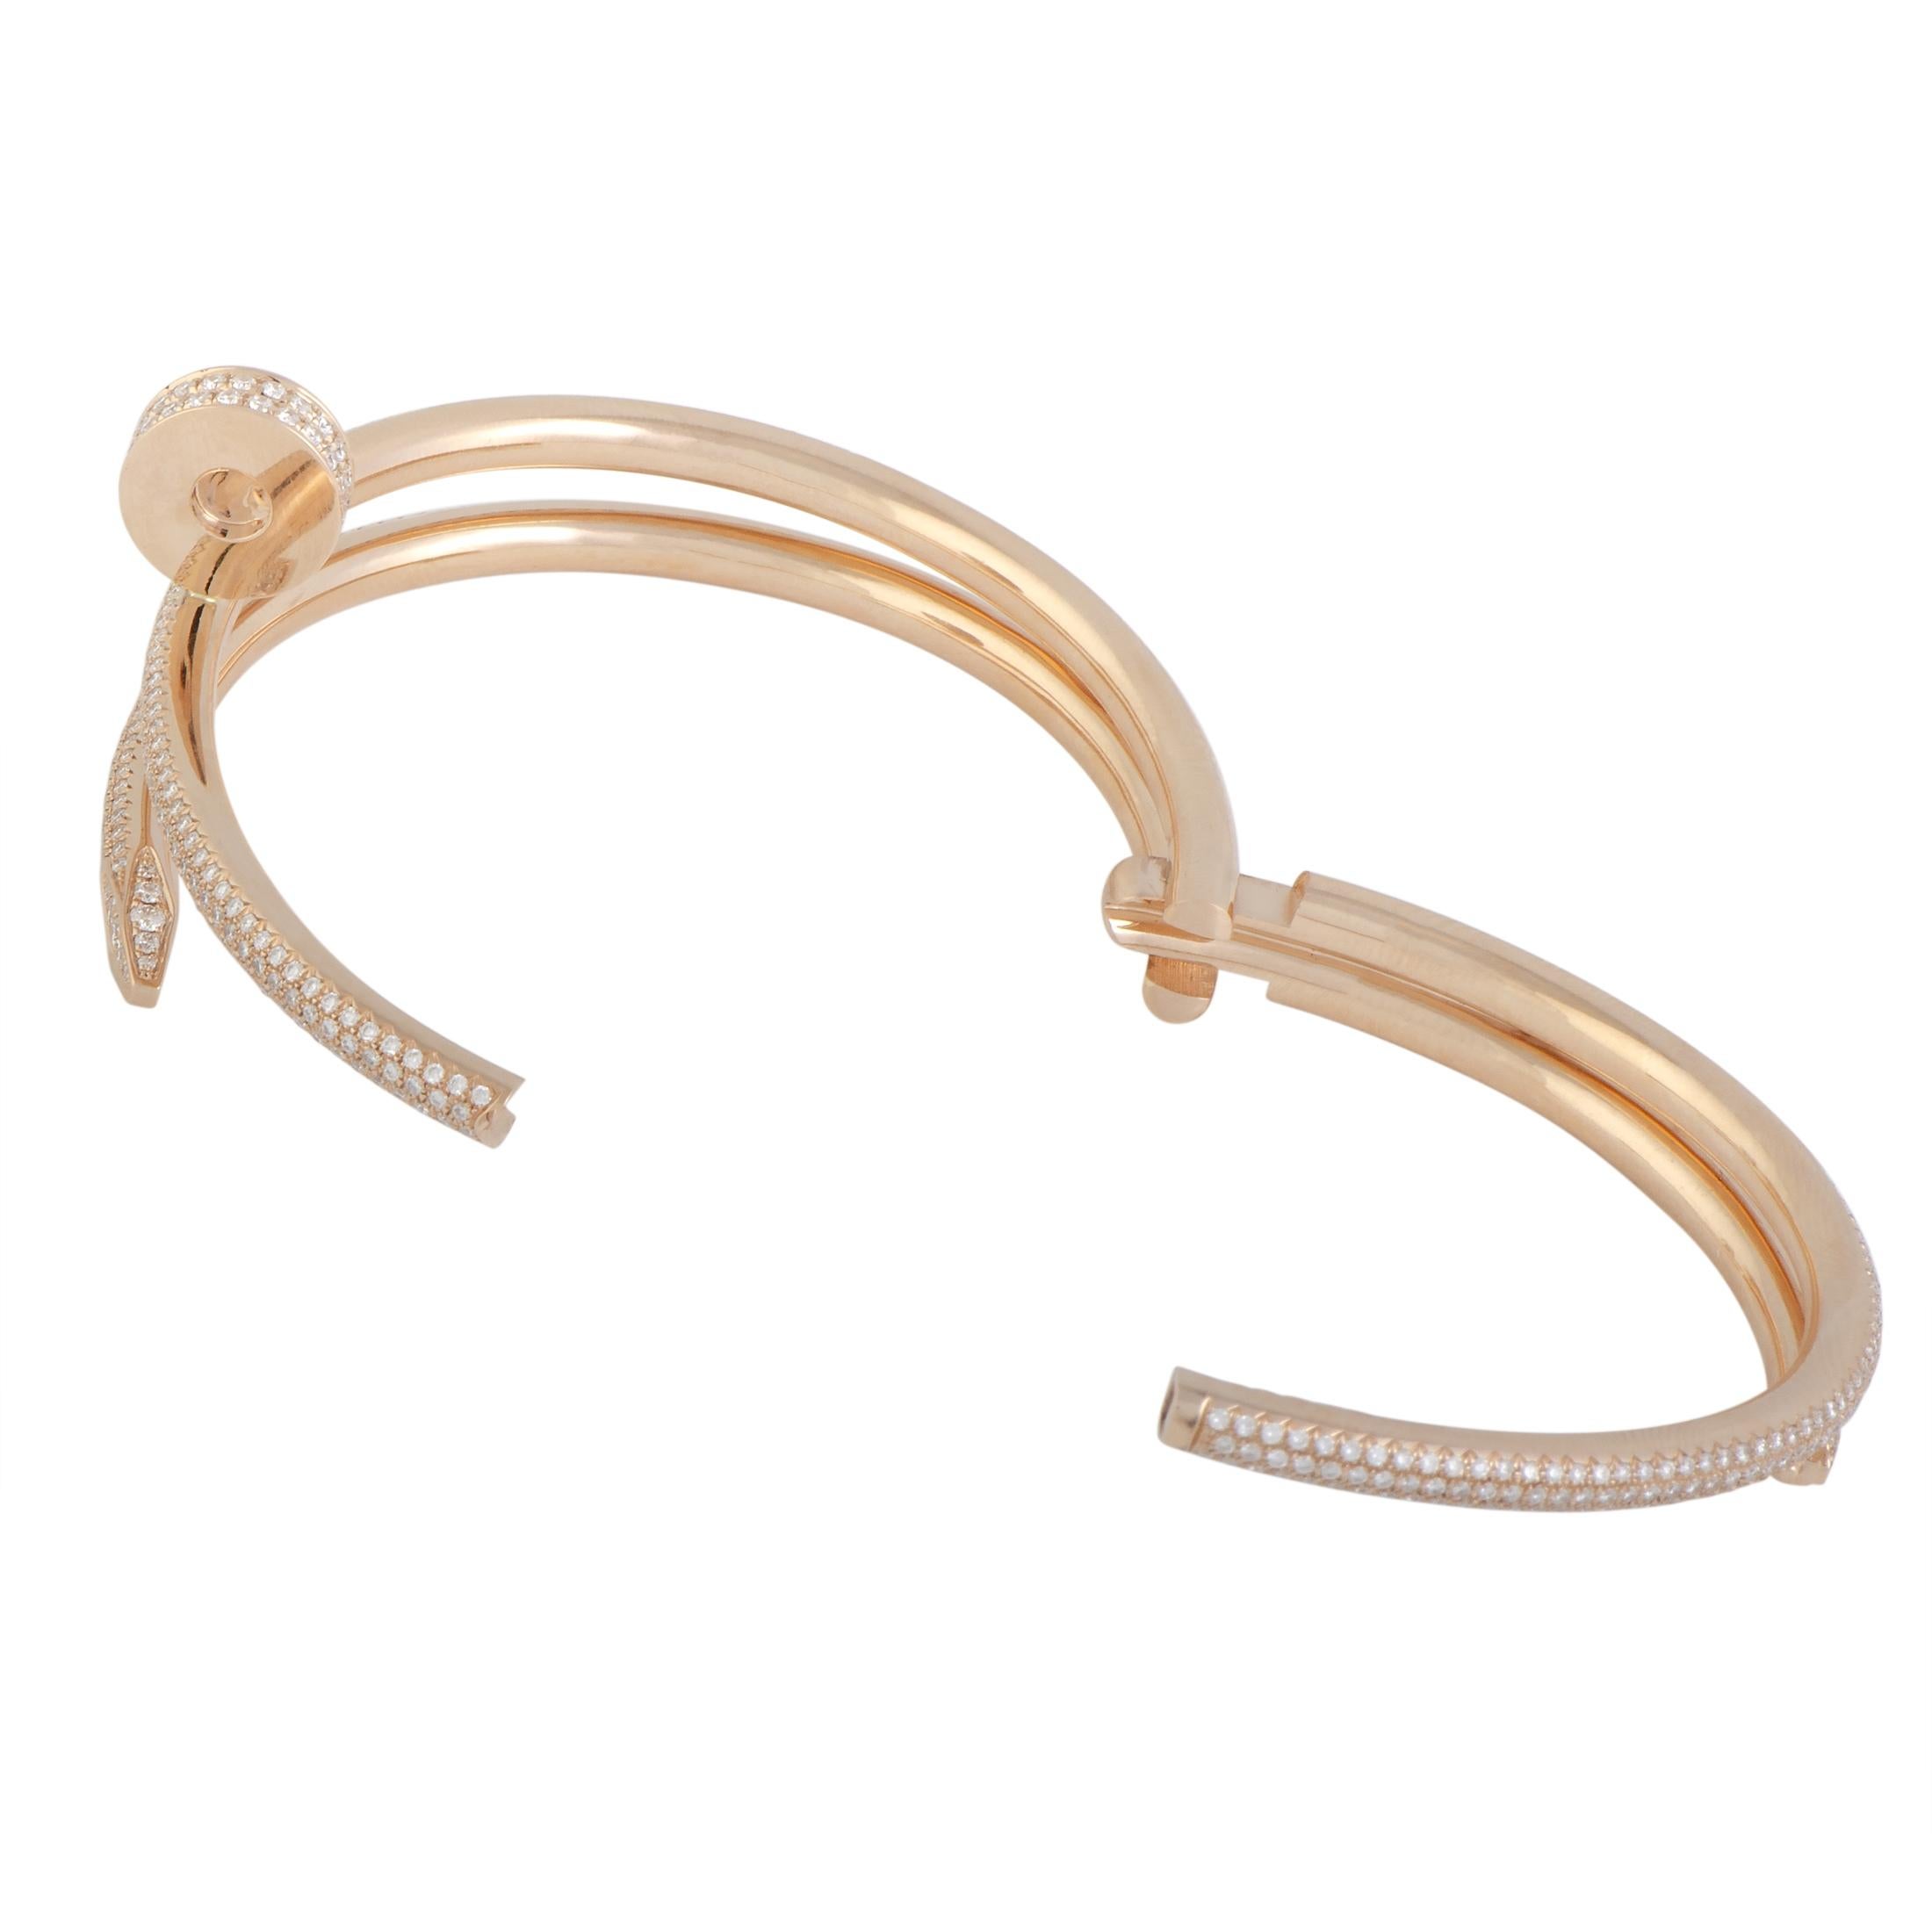 If you are looking for a fashionable jewelry piece that boasts offbeat design with a distinctly luxurious décor then this fascinating Cartier bracelet is a perfect choice. Created for the renowned “Juste un Clou” collection, it is made of radiant